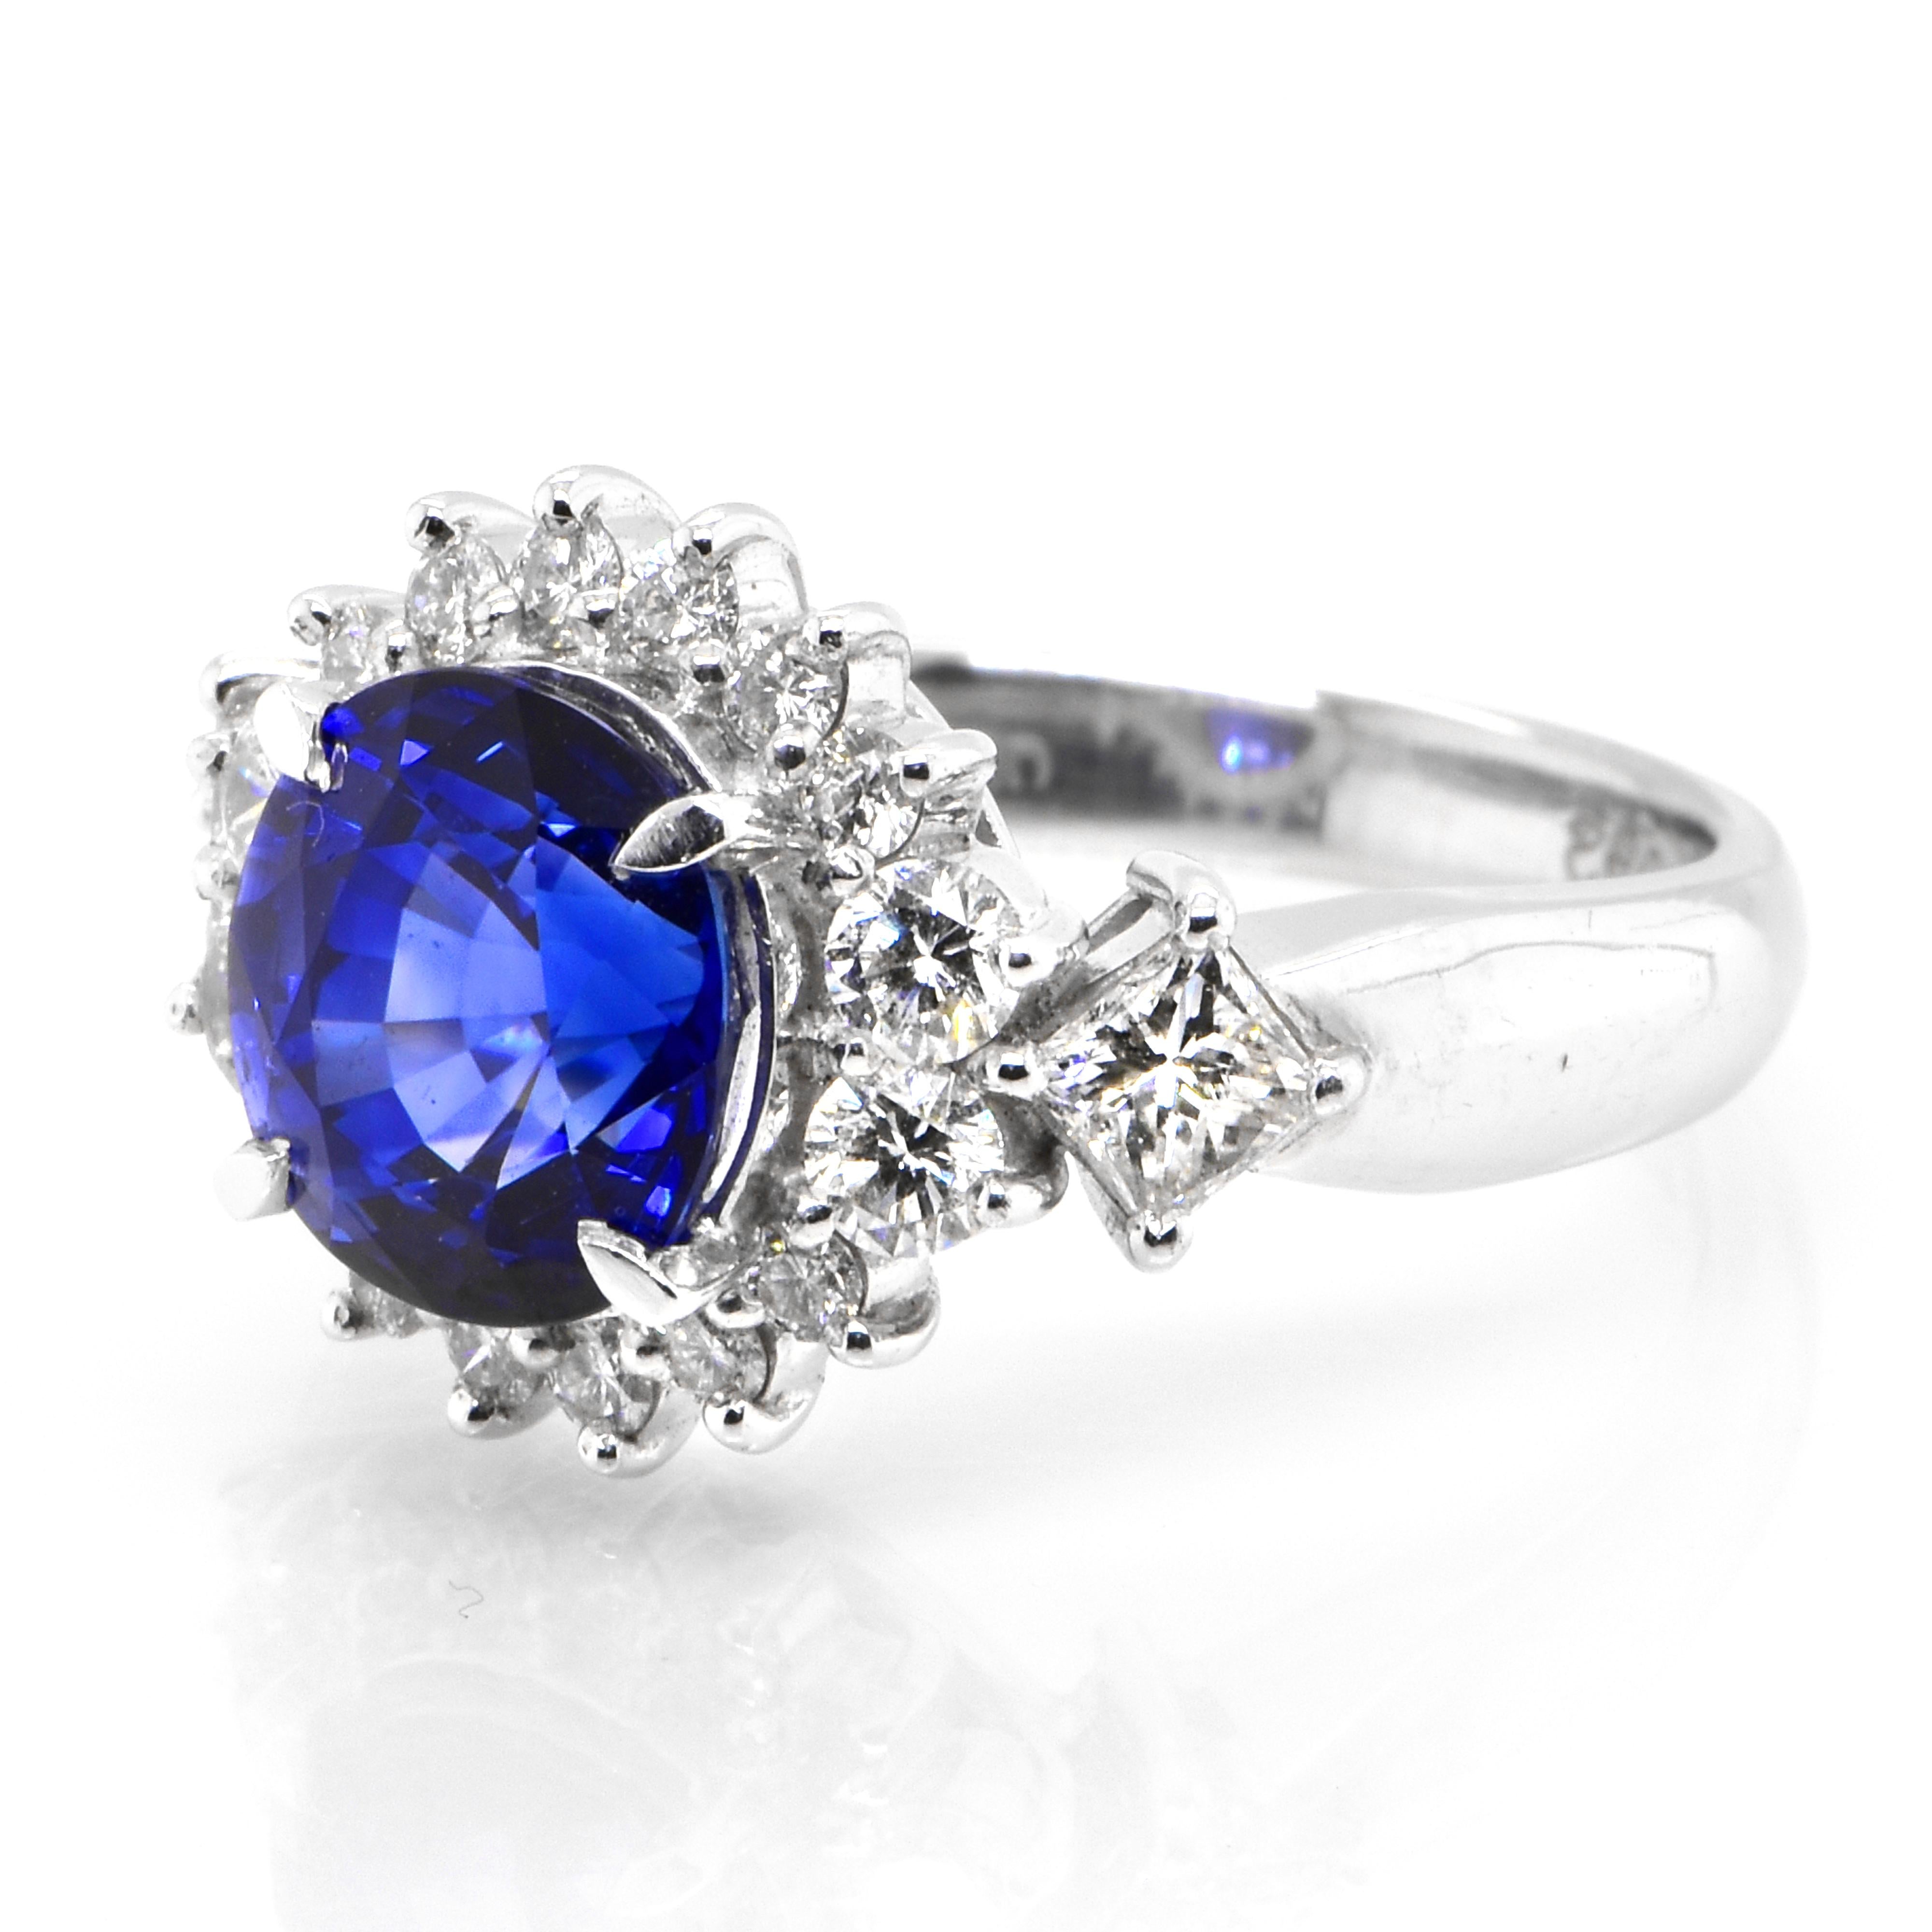 A beautiful ring featuring 3.21 Carat Natural Royal Blue Sapphire and 0.82 Carats Diamond Accents set in Platinum. Sapphires have extraordinary durability - they excel in hardness as well as toughness and durability making them very popular in